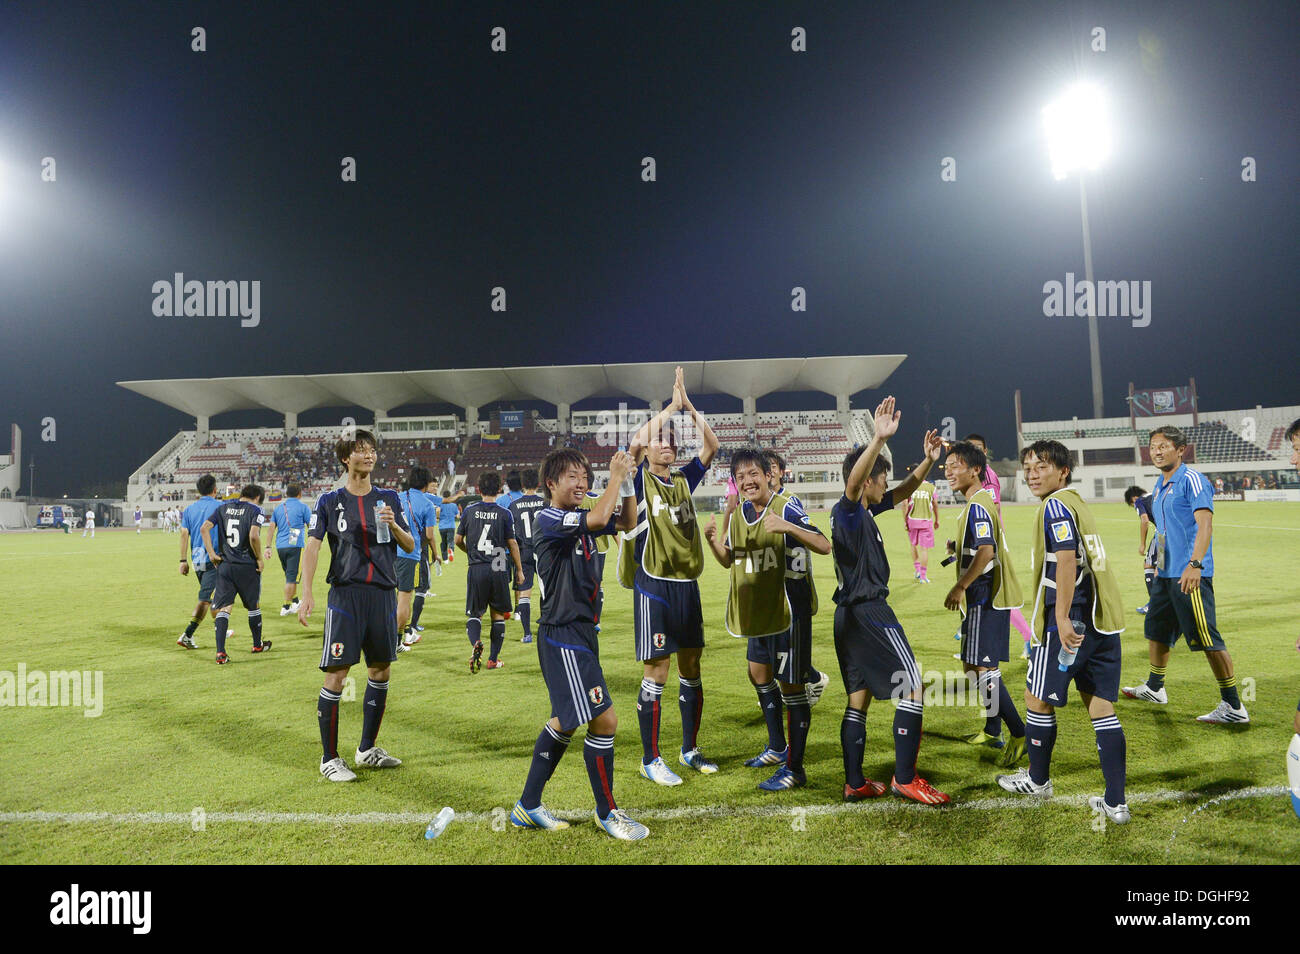 Sharjah, United Arab Emirates. 21st Oct, 2013. Japan team group (JPN) Football / Soccer : Players of Japan celebrate their winning after the FIFA U-17 World Cup UAE 2013 Group D match between Japan 3-1 Venezuela at Sharjah Stadium in Sharjah, United Arab Emirates . Credit:  FAR EAST PRESS/AFLO/Alamy Live News Stock Photo